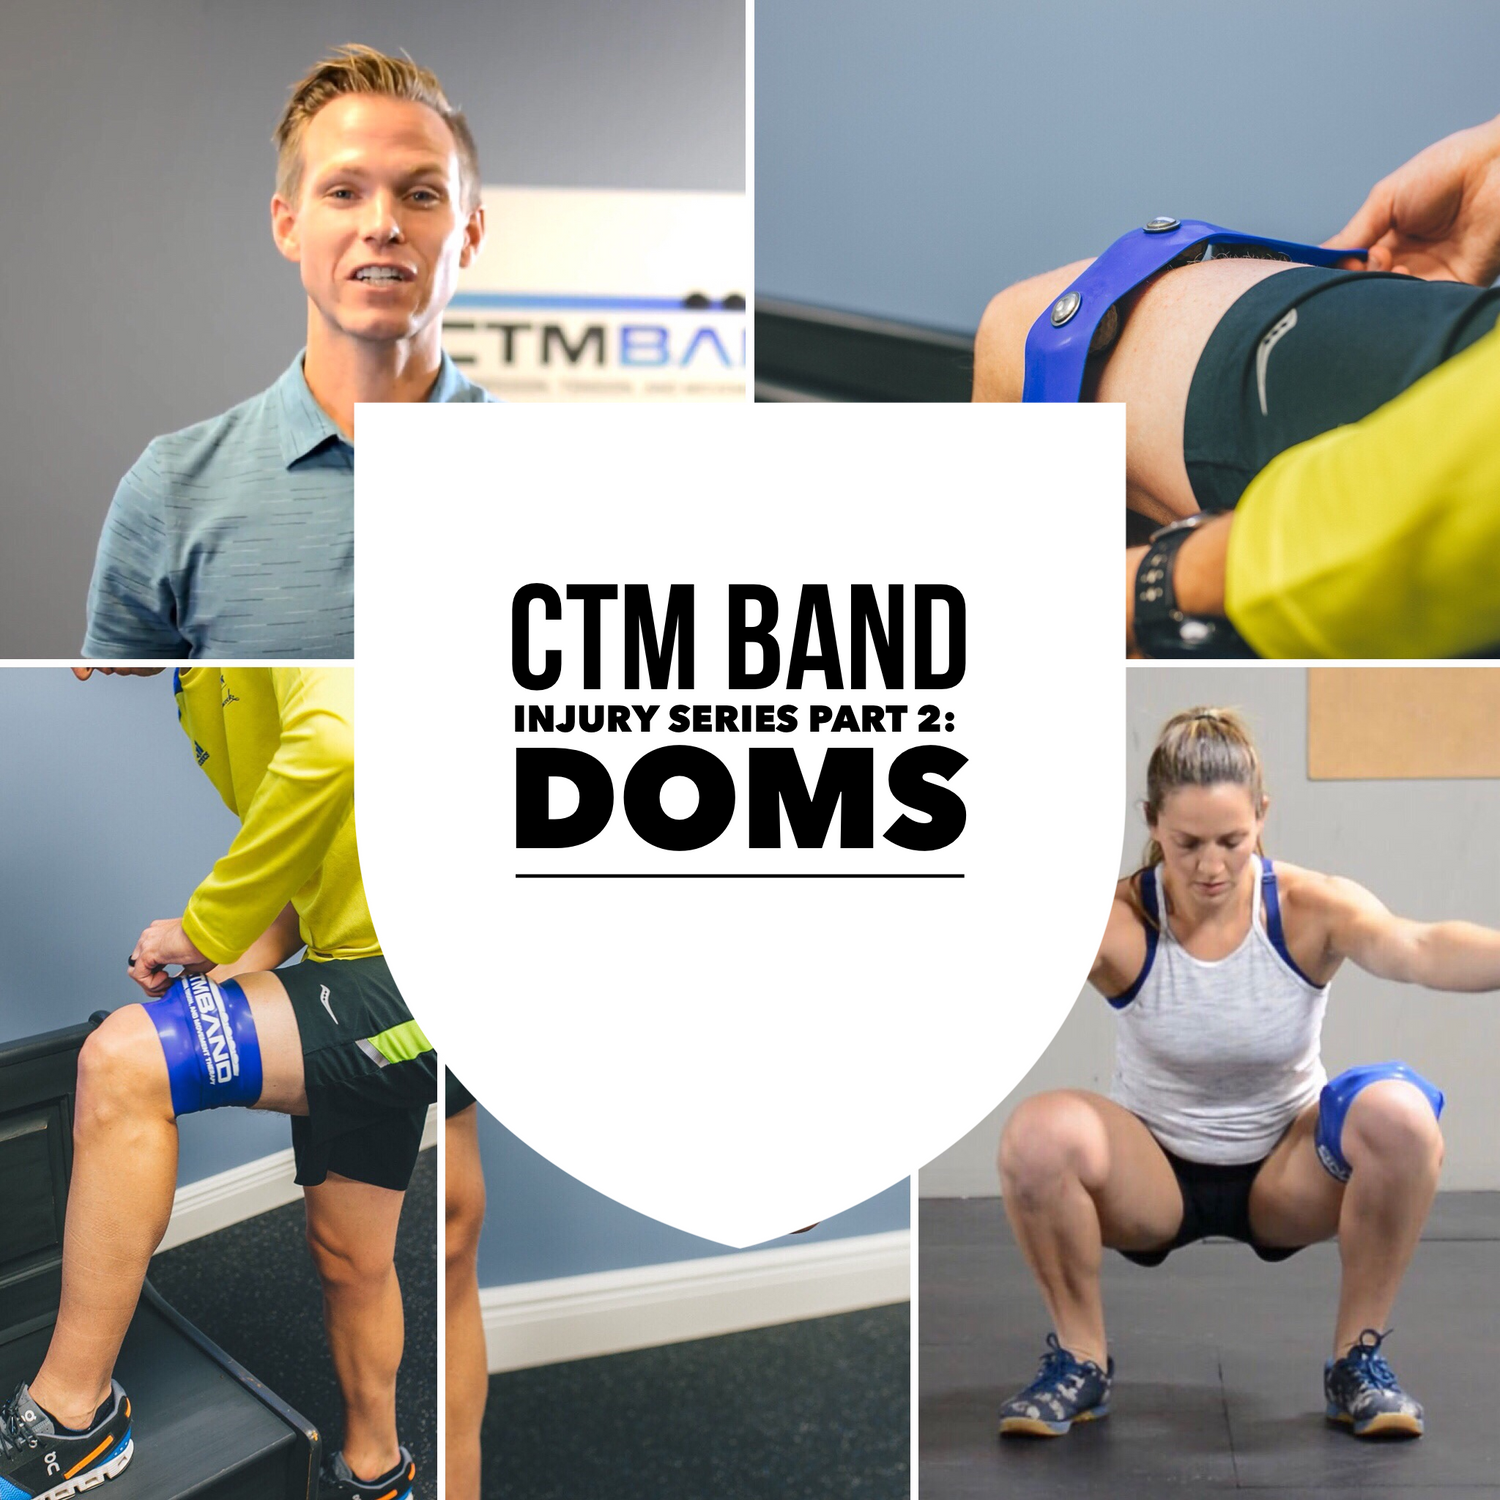 Image. The CTM Band is a soft tissue massage tool, achilles massage tool, hamstring massage tool, etc. It helps with pain on top of kneecap, patellofemoral pain syndrome, sore knees from running and many others. Get rid of sore muscles fast.